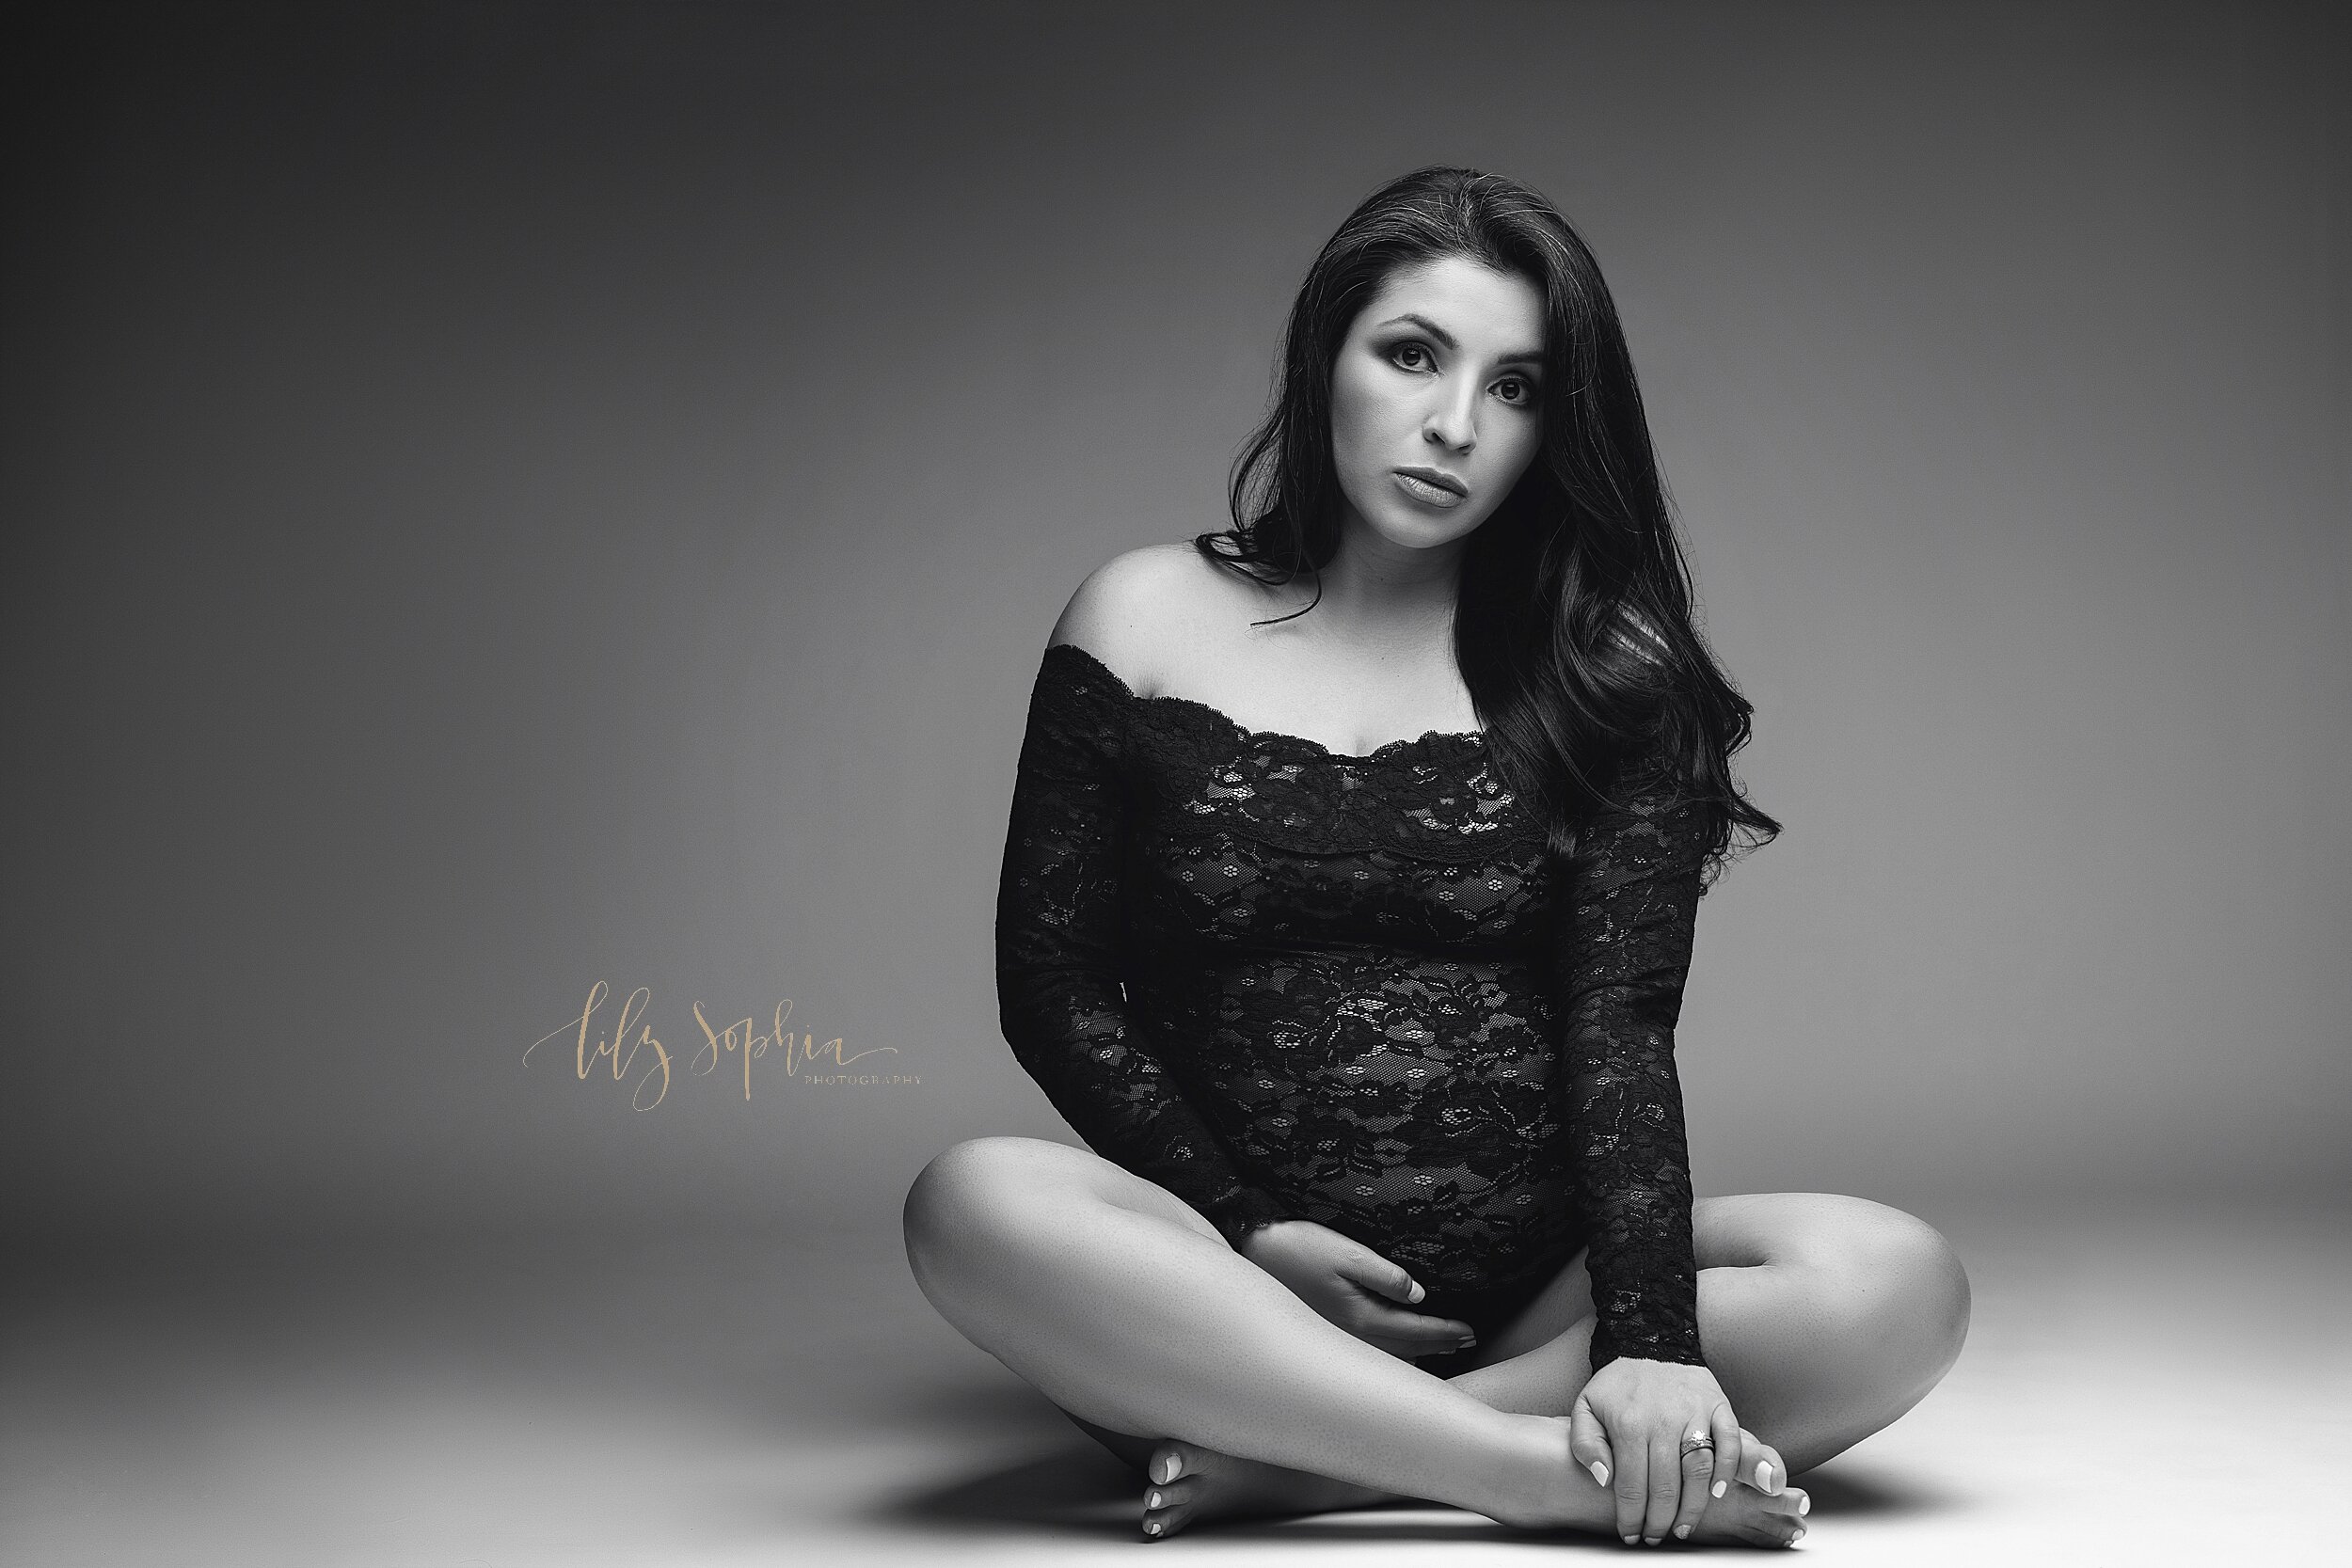  A flack and white fine art maternity portrait of a pregnant Hispanic woman with long hair wearing a black off the shoulder lace bodysuit while sitting on the floor cross legged.  